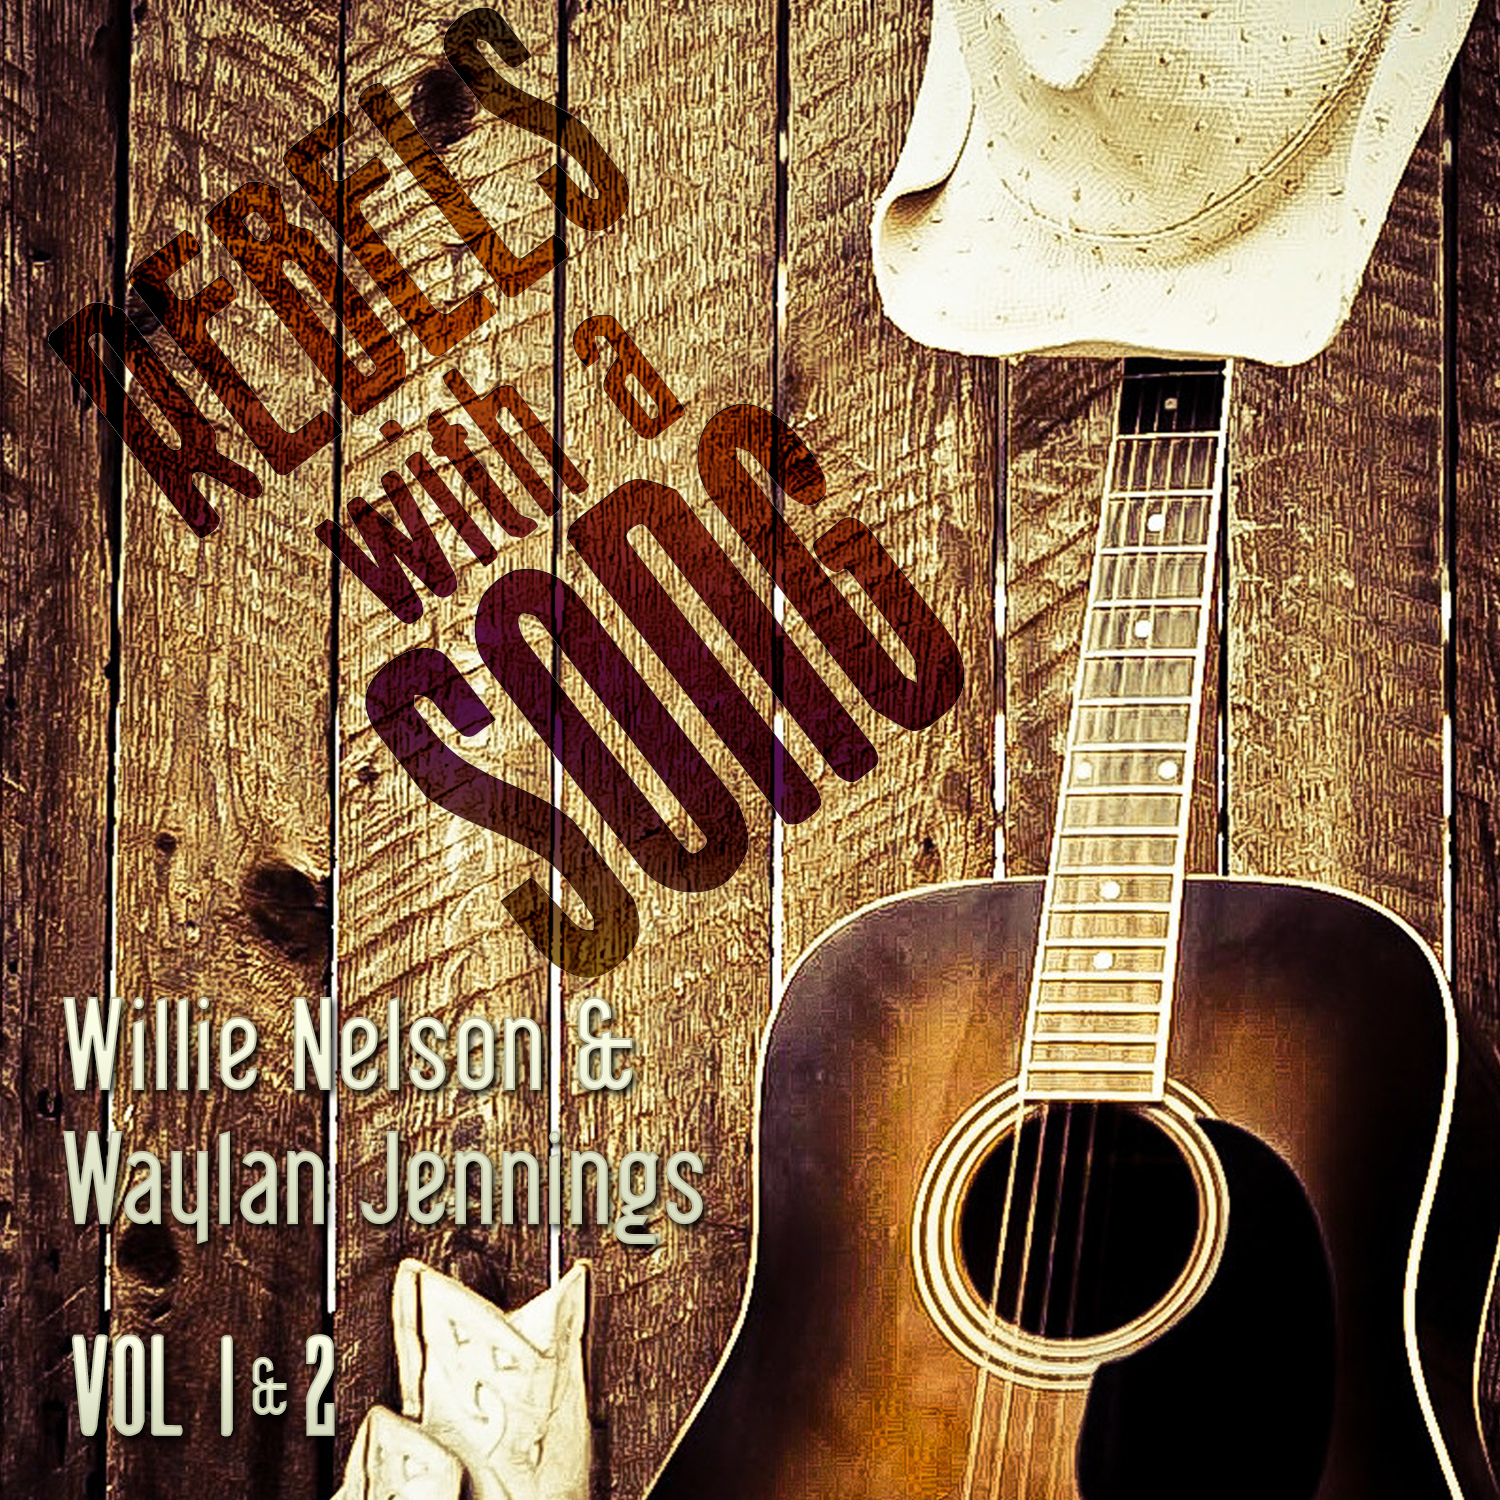 Rebels with a Song: Vol 1 & 2 by Willie Nelson